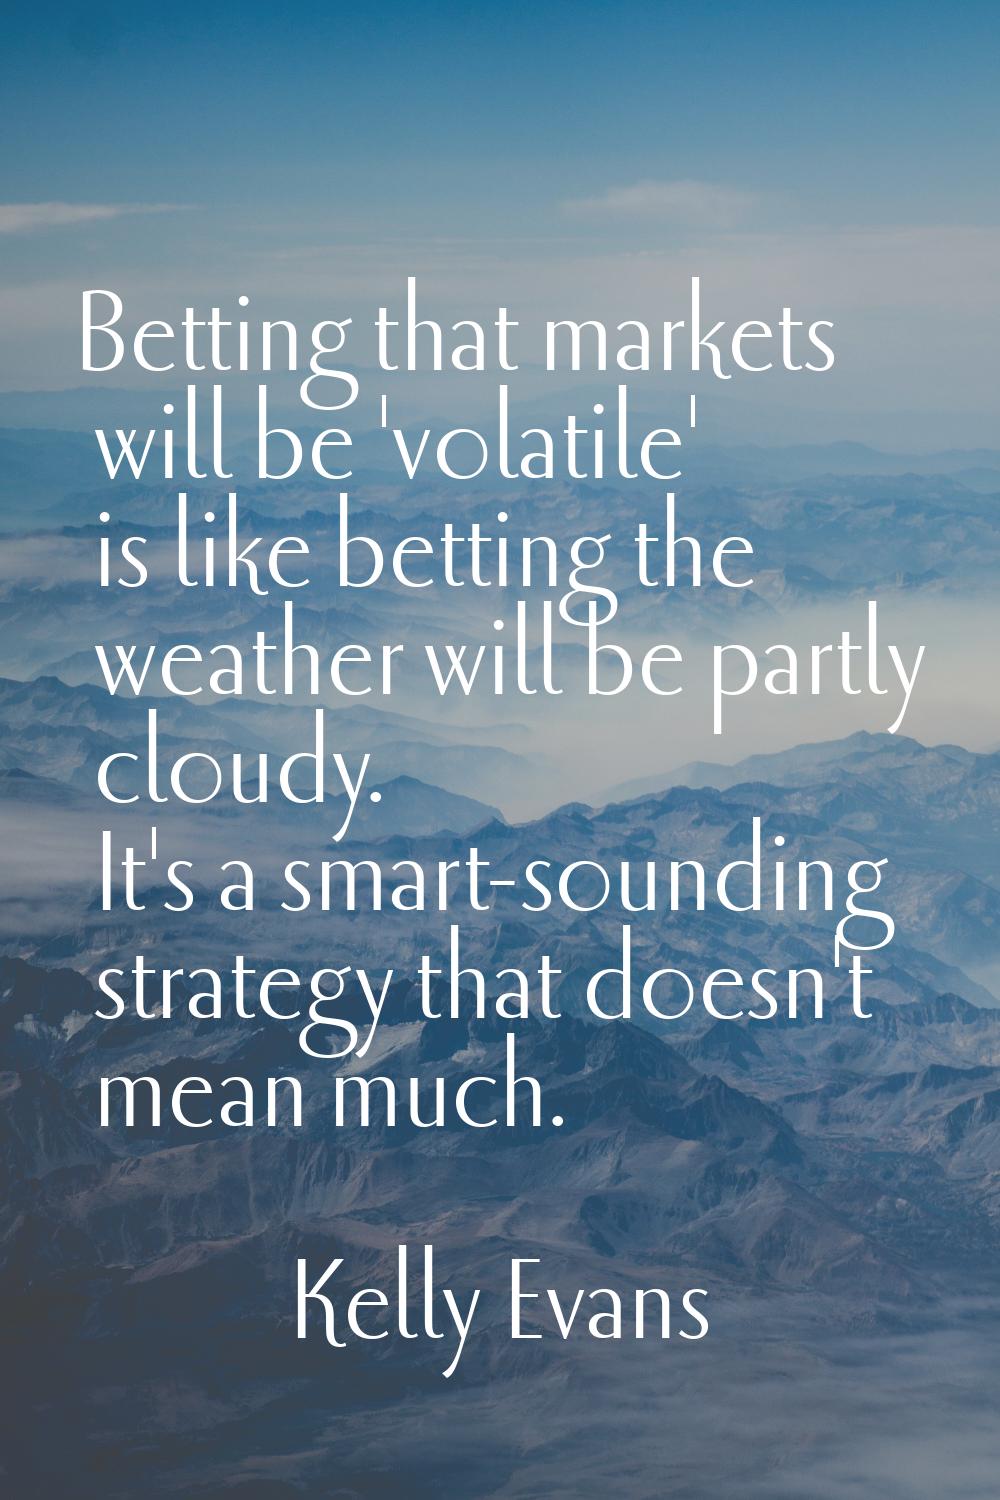 Betting that markets will be 'volatile' is like betting the weather will be partly cloudy. It's a s